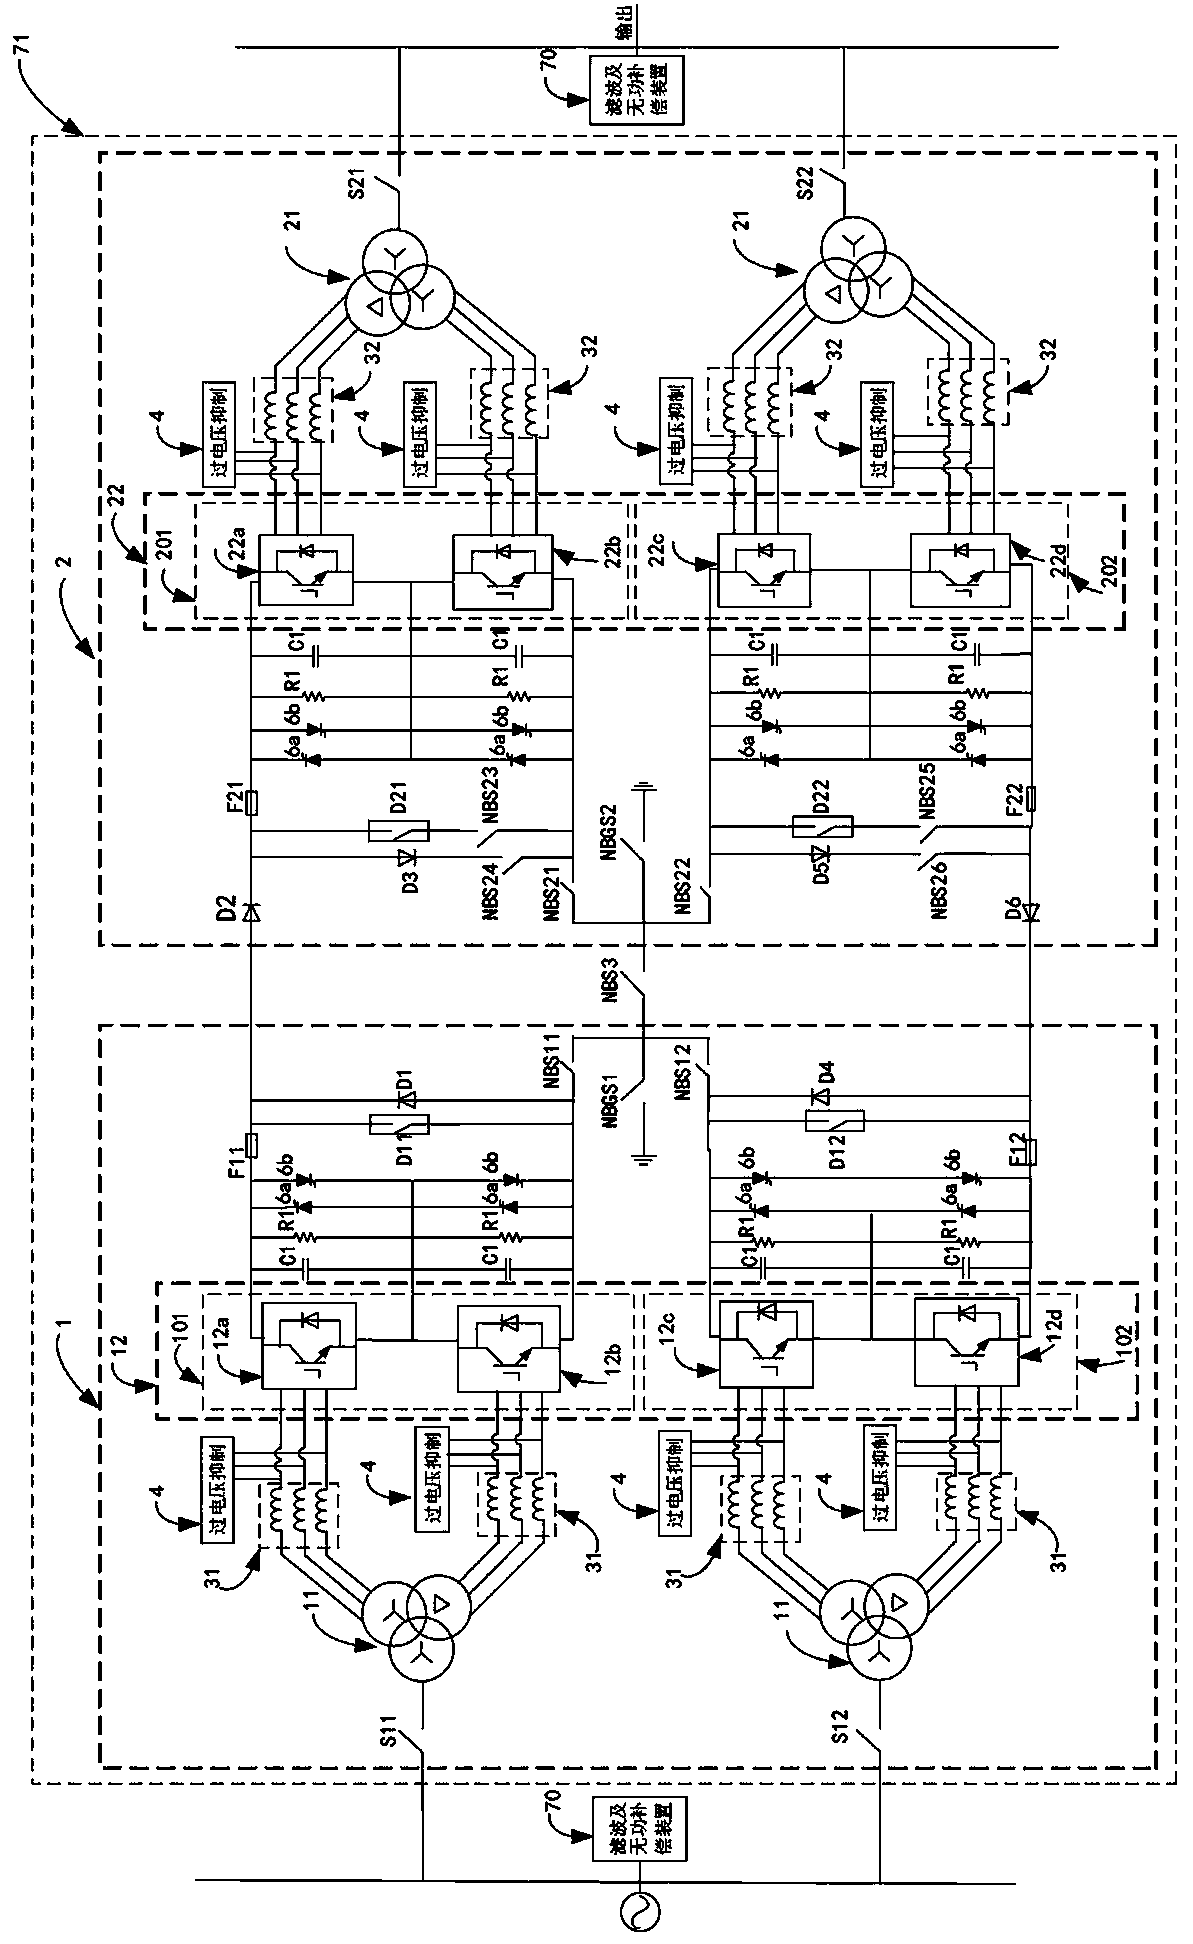 Current conversion device for ship shore power system